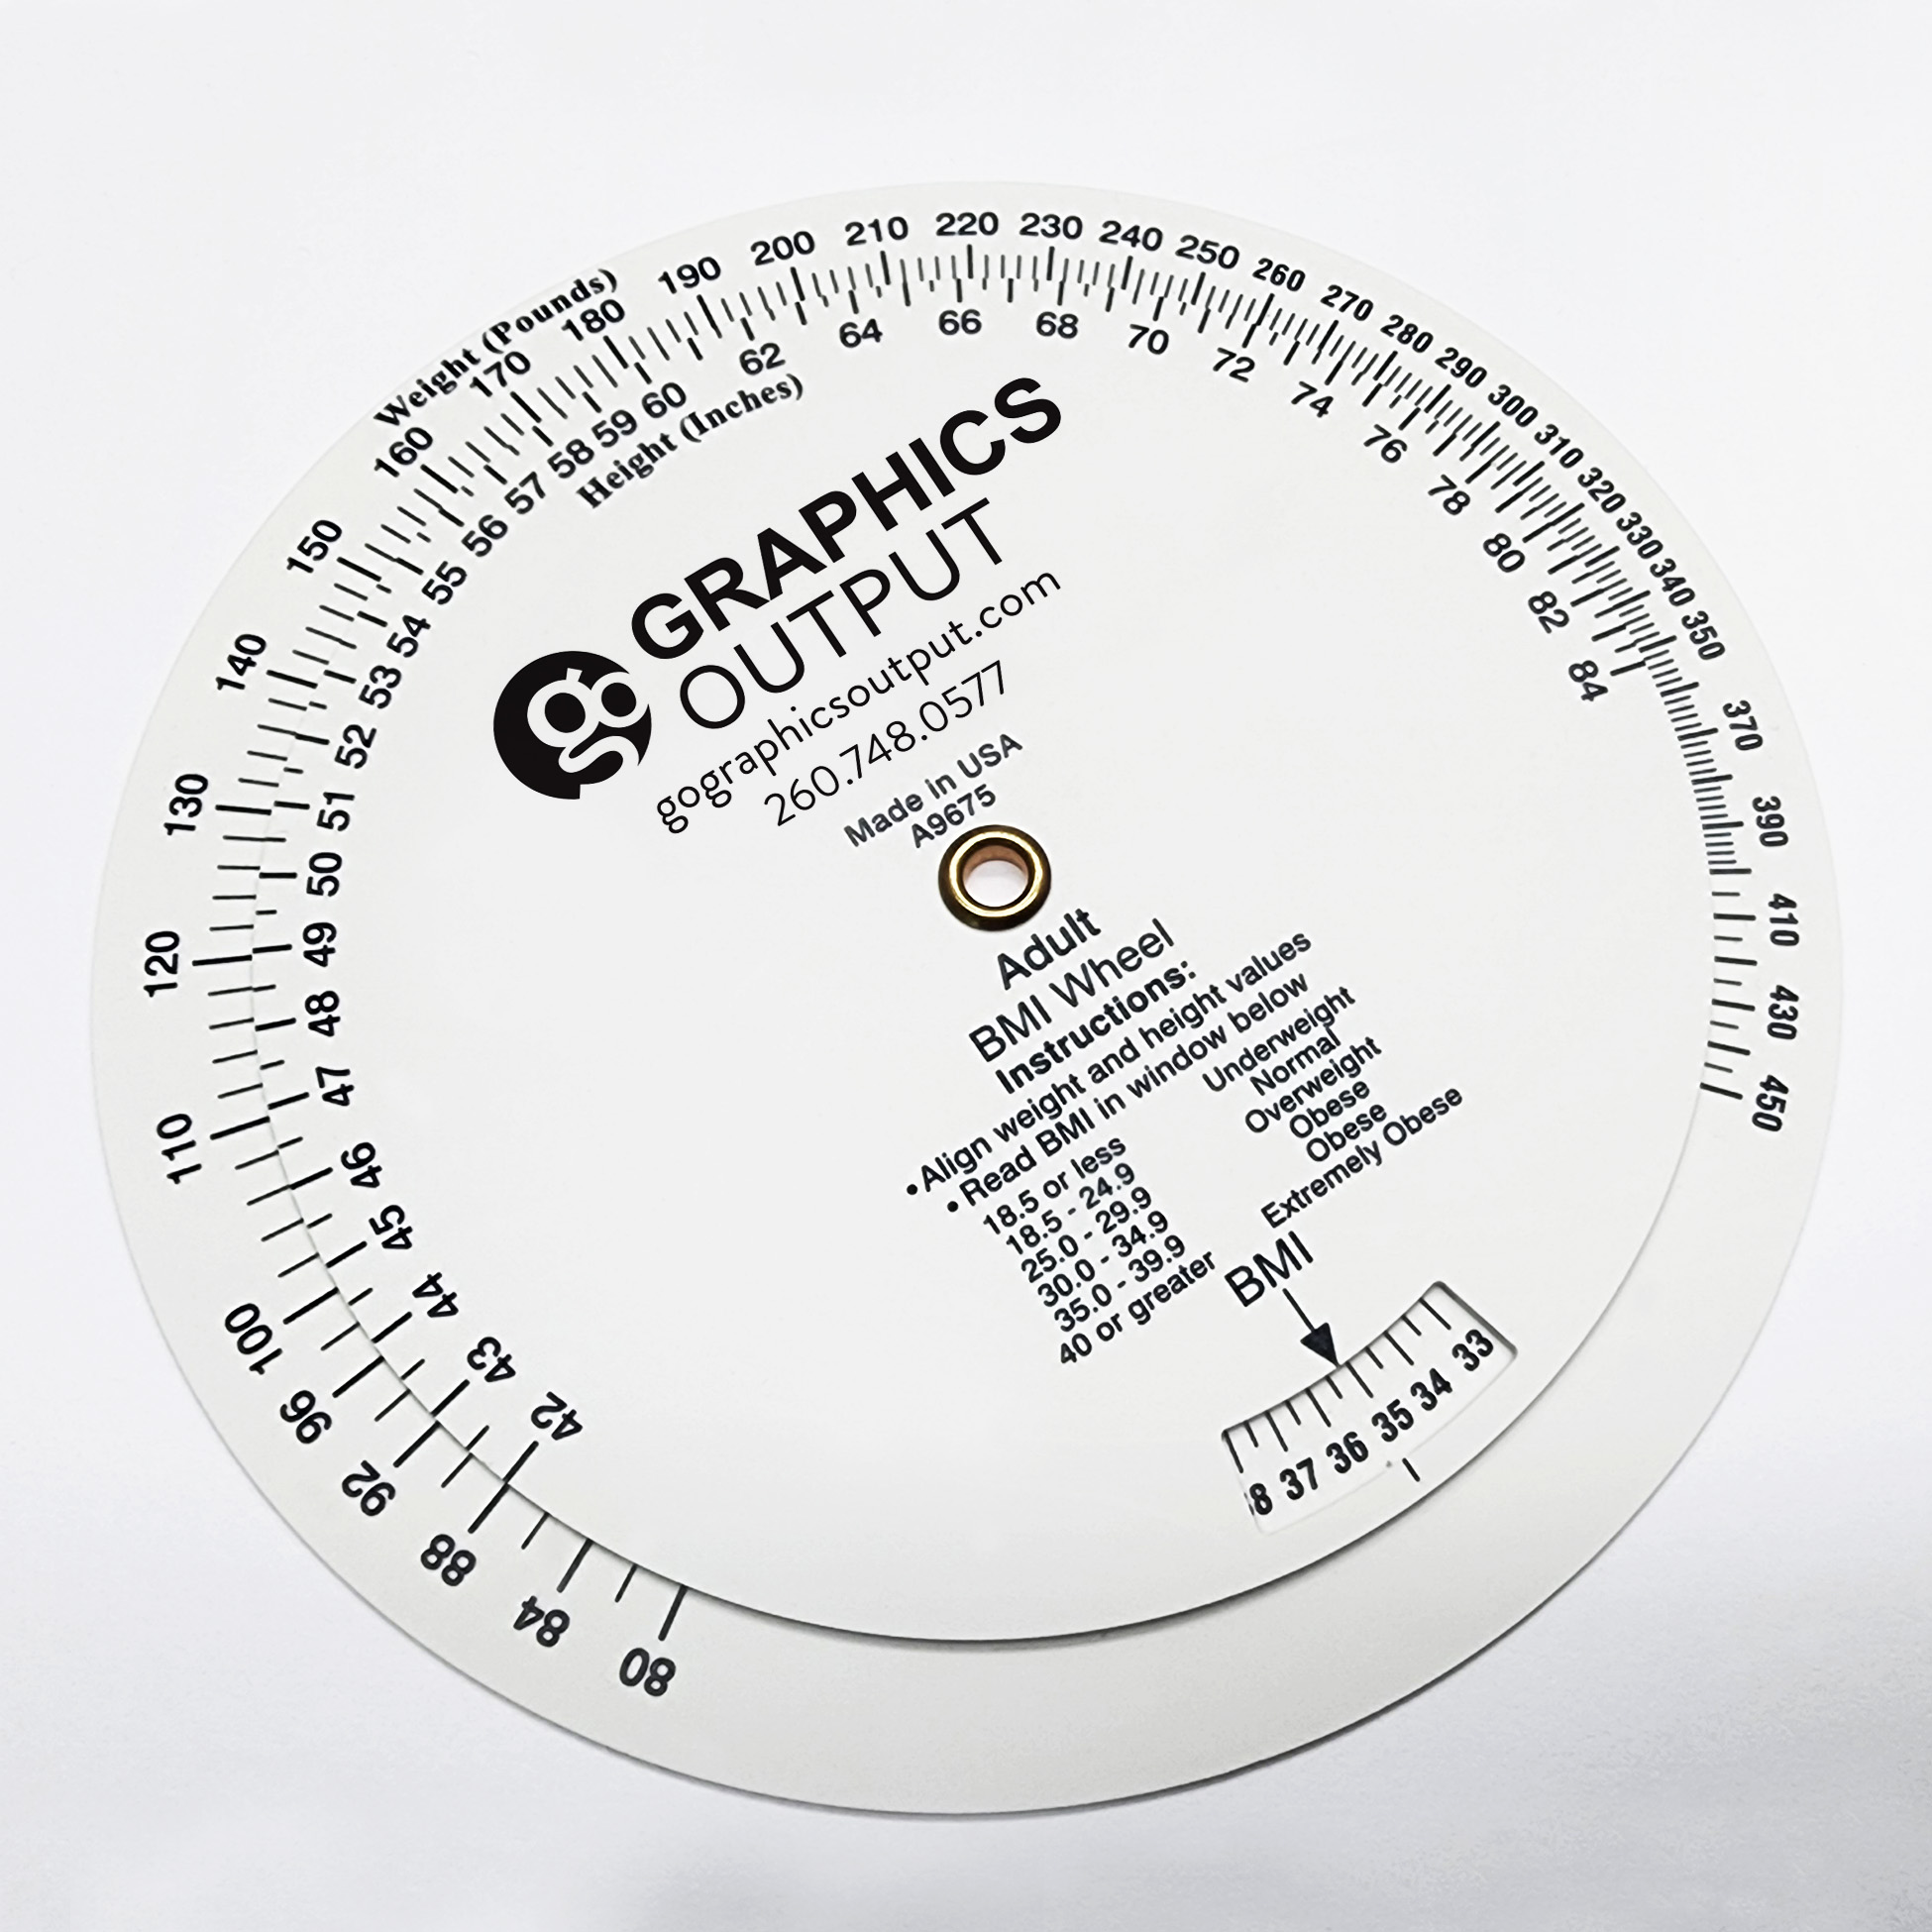 Graphics Output logo on white BMI Wheel to calculate body mass index